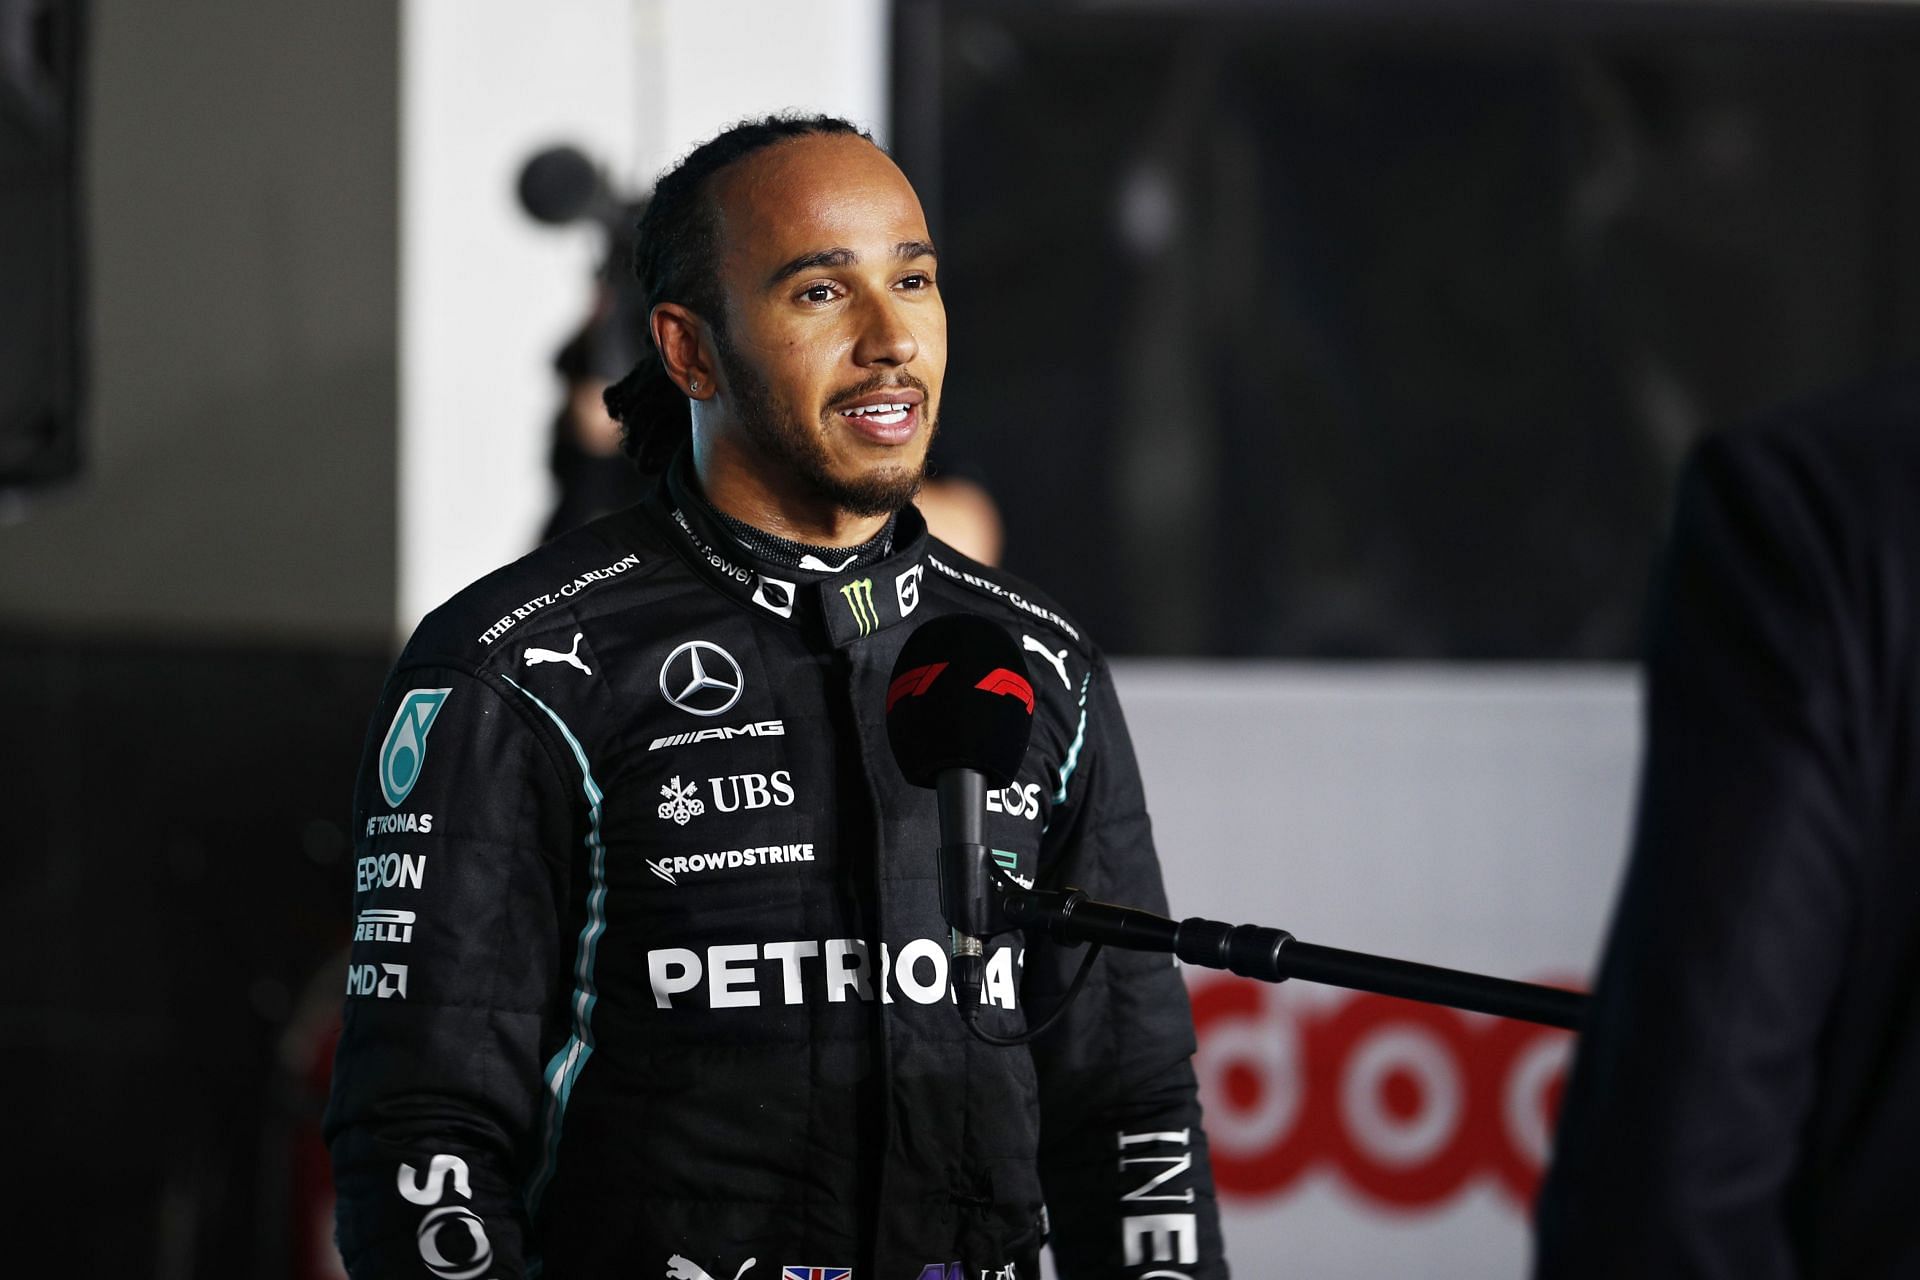 Pole position qualifier Lewis Hamilton (Photo by Hamad I Mohammed - Pool/Getty Images)